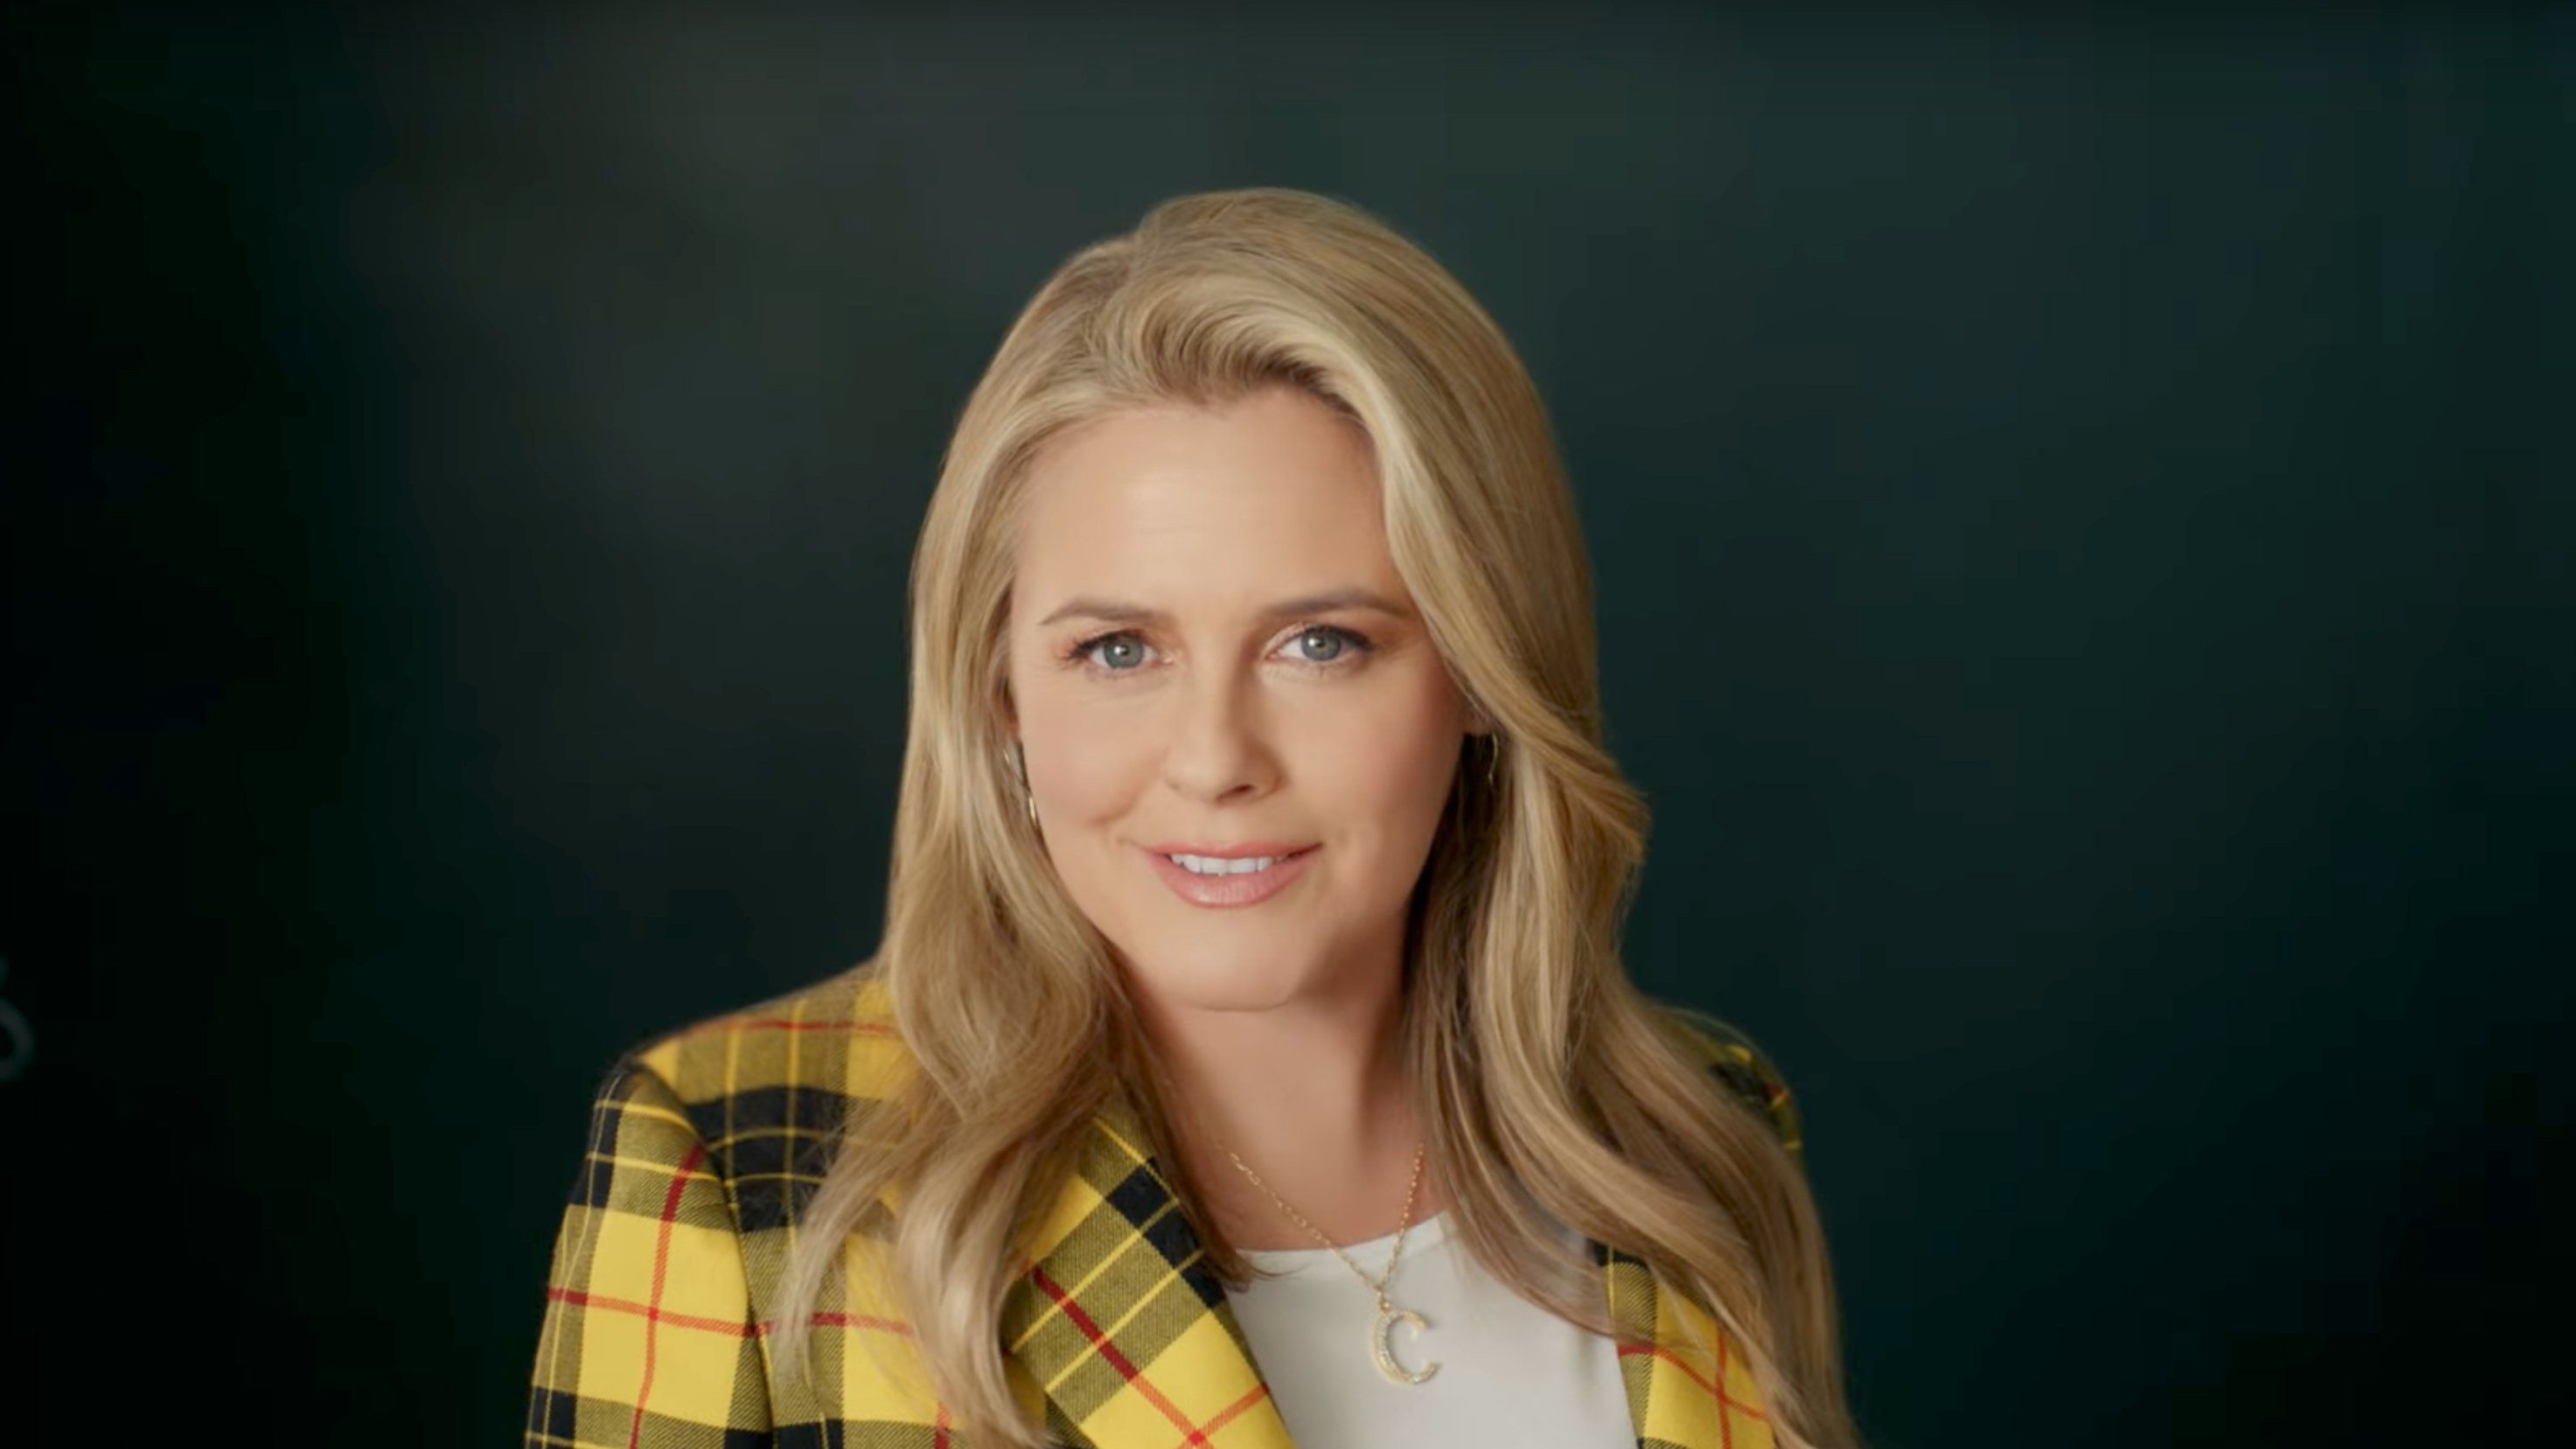 Alicia Silverstone recreates her most iconic 'Clueless' look